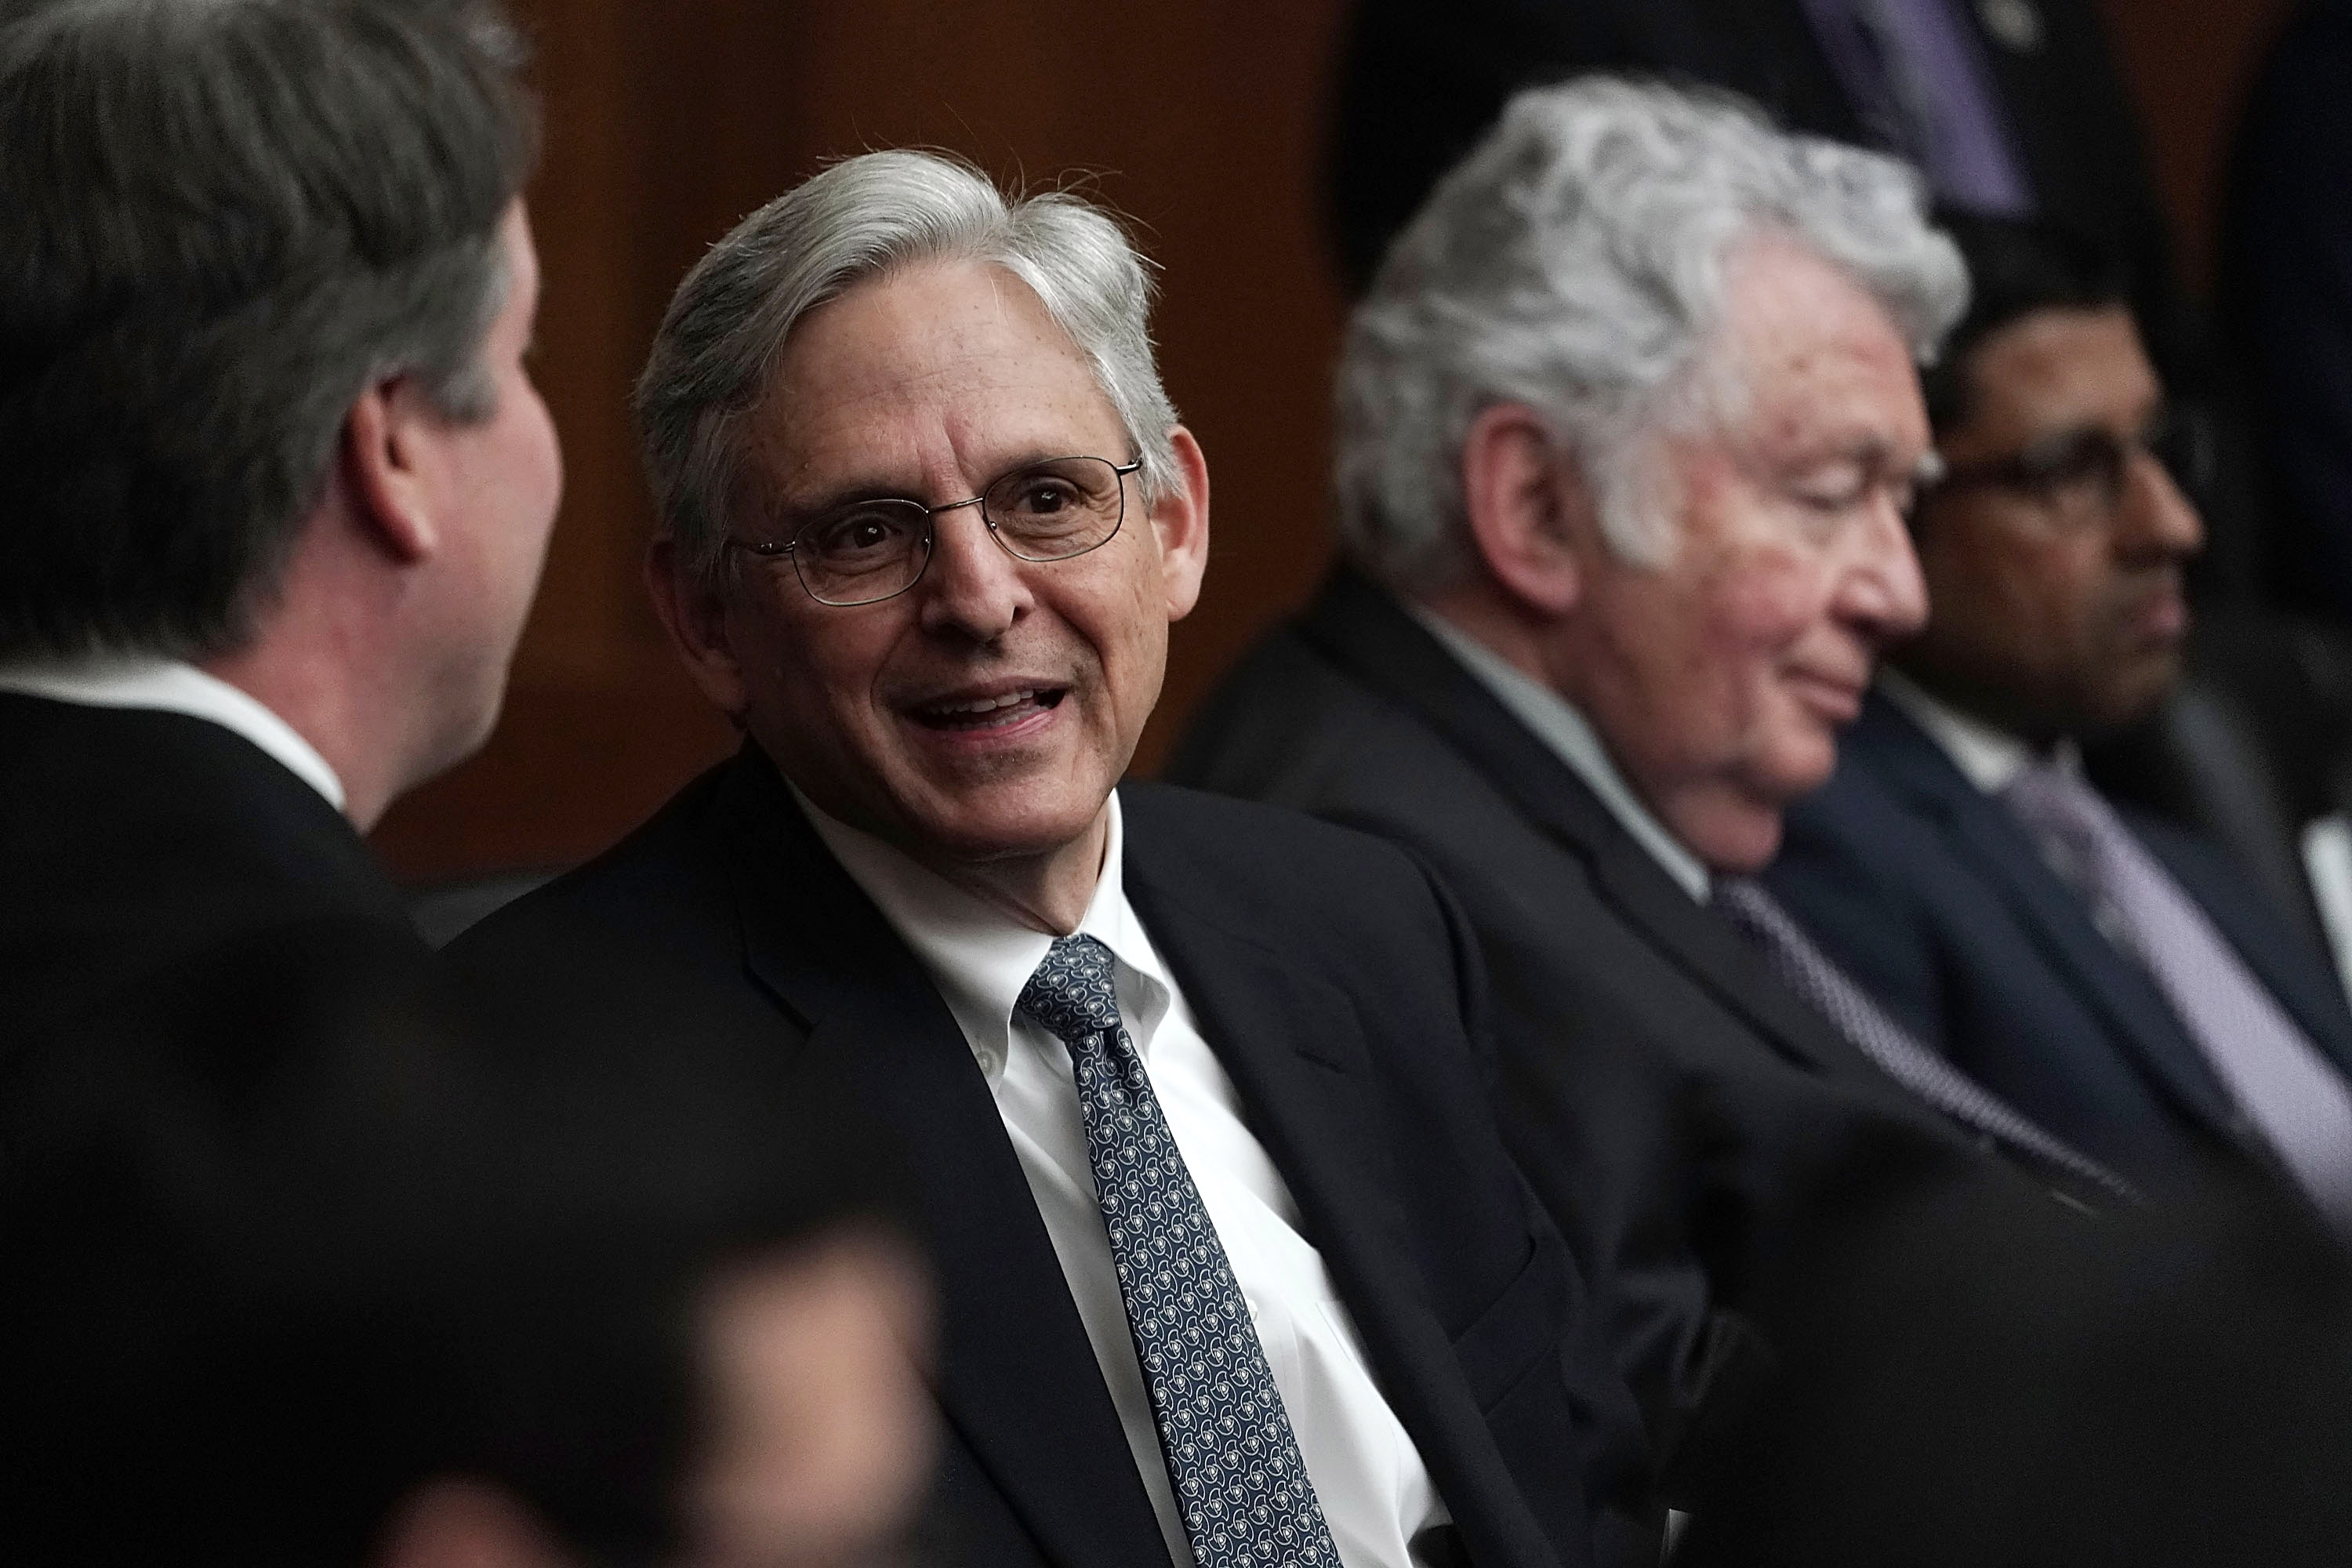 Merrick Garland will say at a confirmation hearing that he will sue “white supremacists”